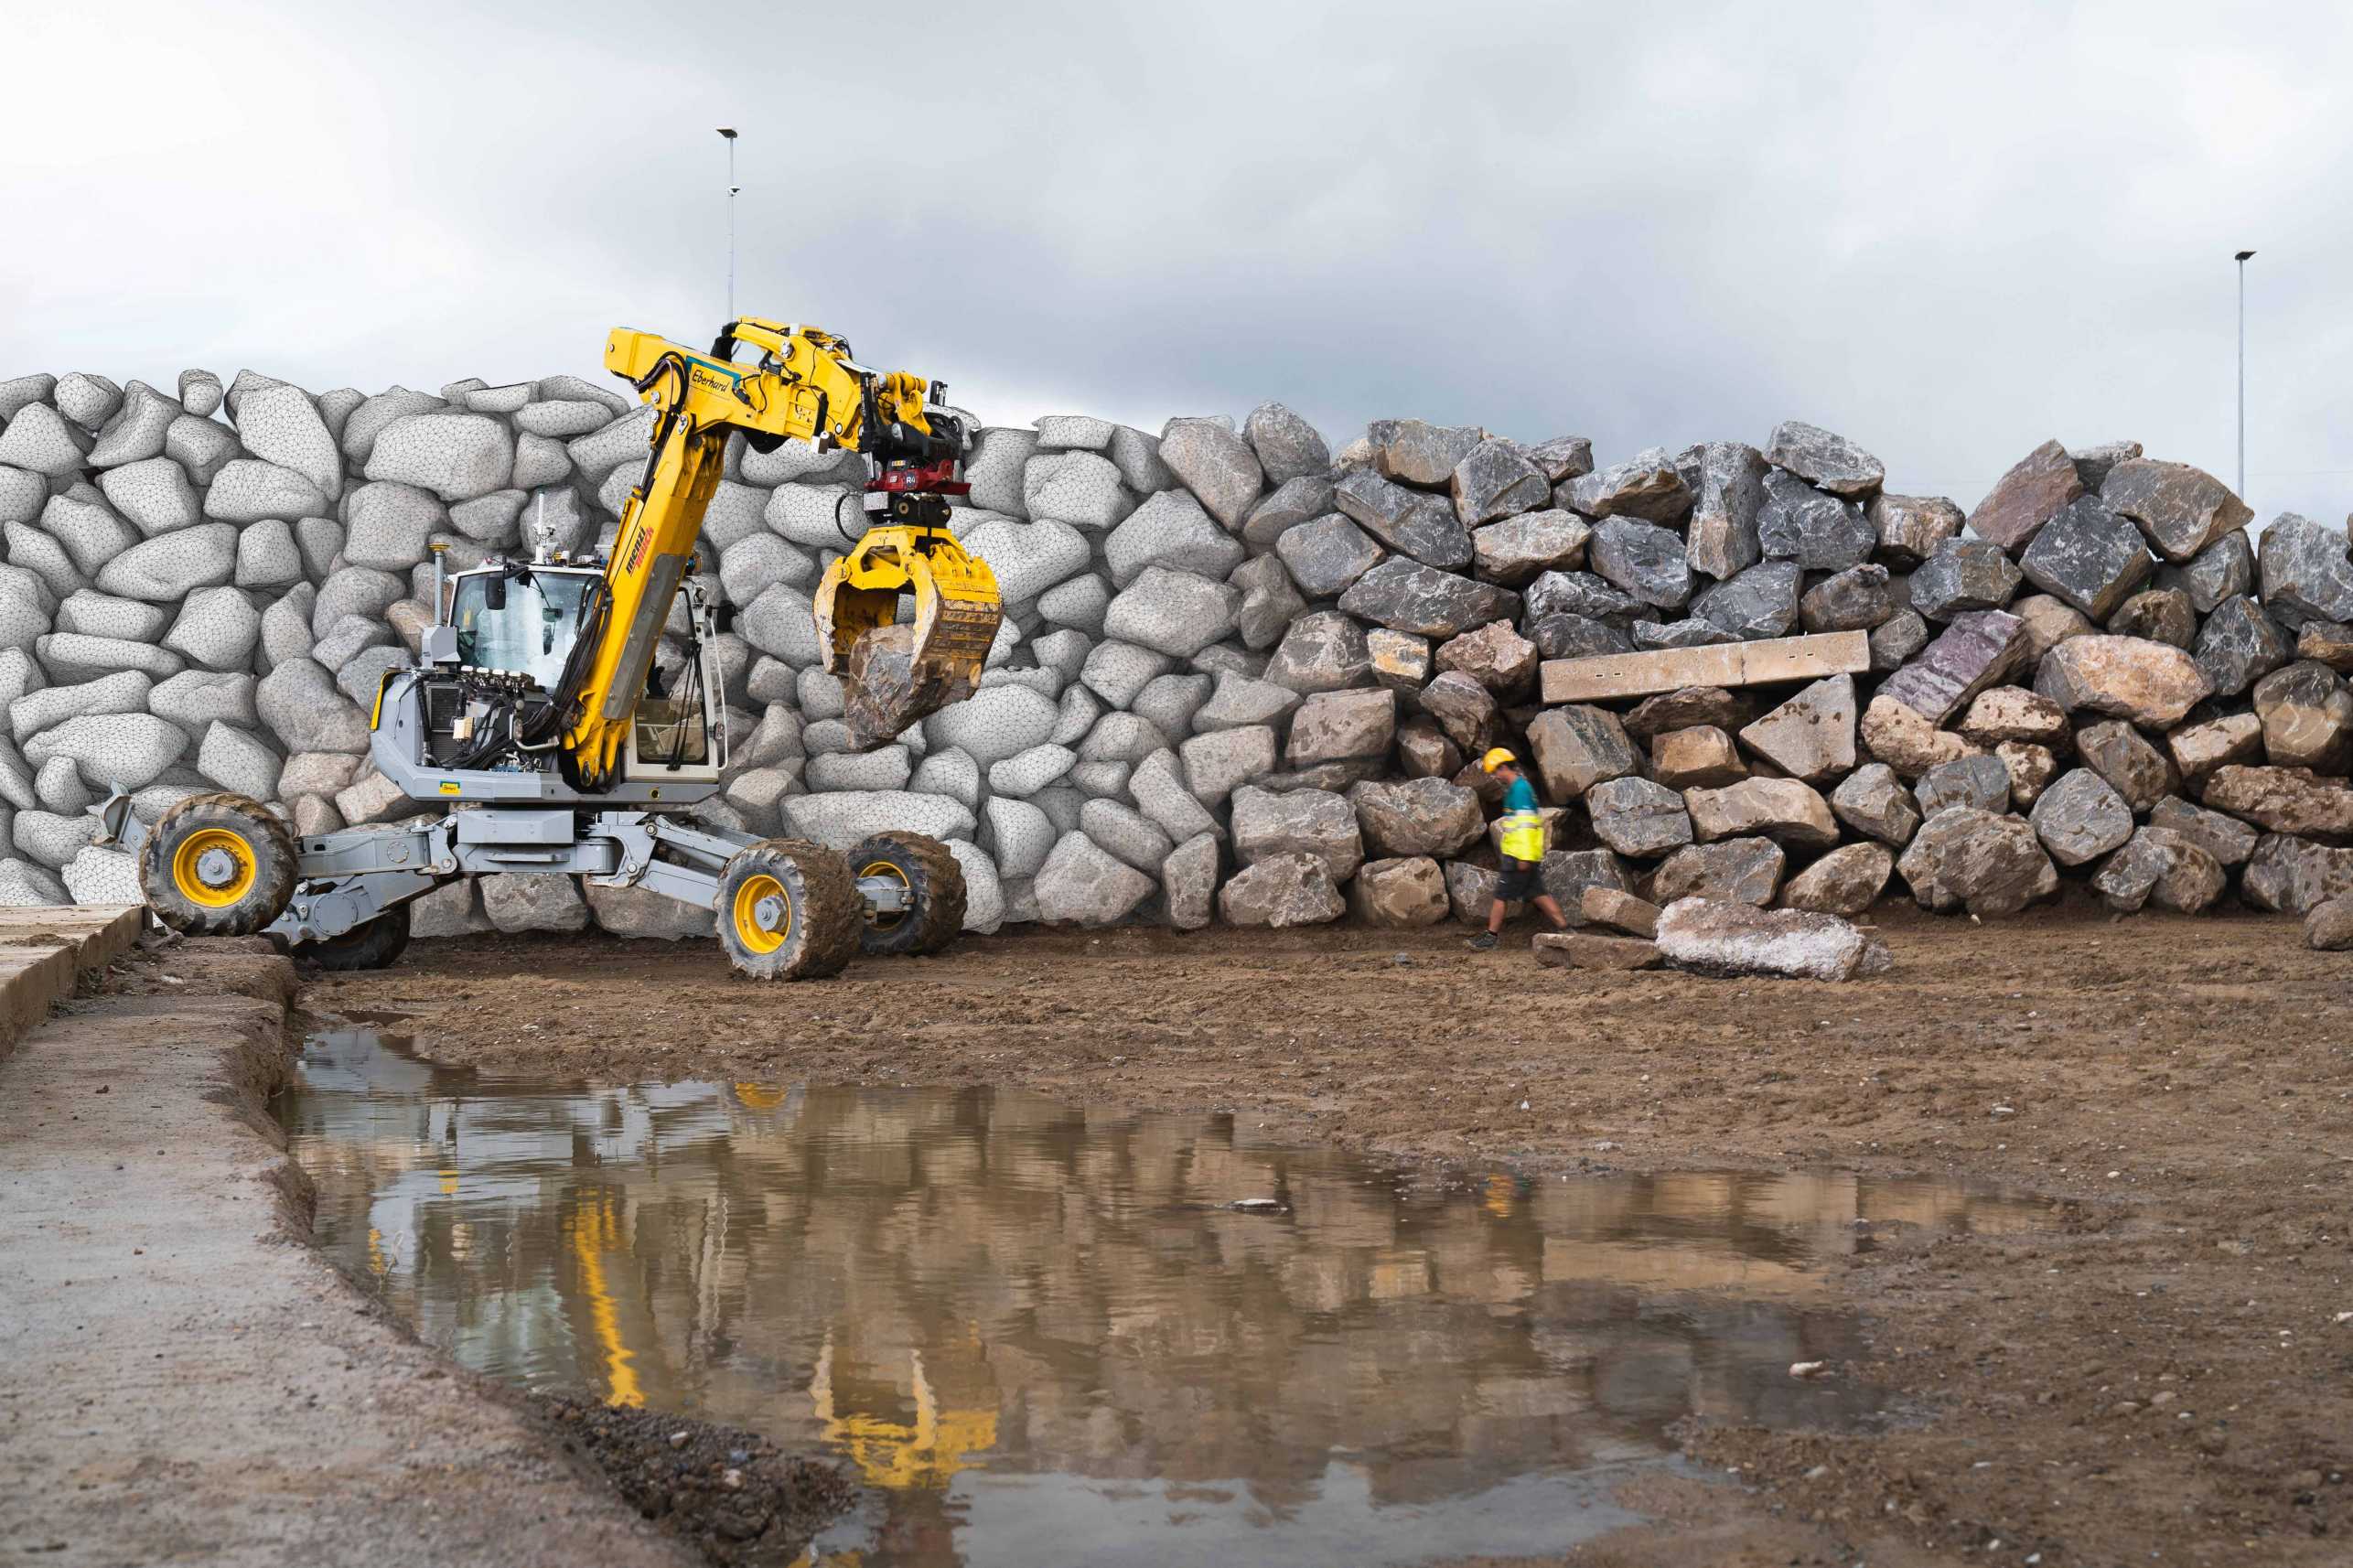 Autonomous Excavator Constructs a 6-Meter-High Dry-Stone Wall